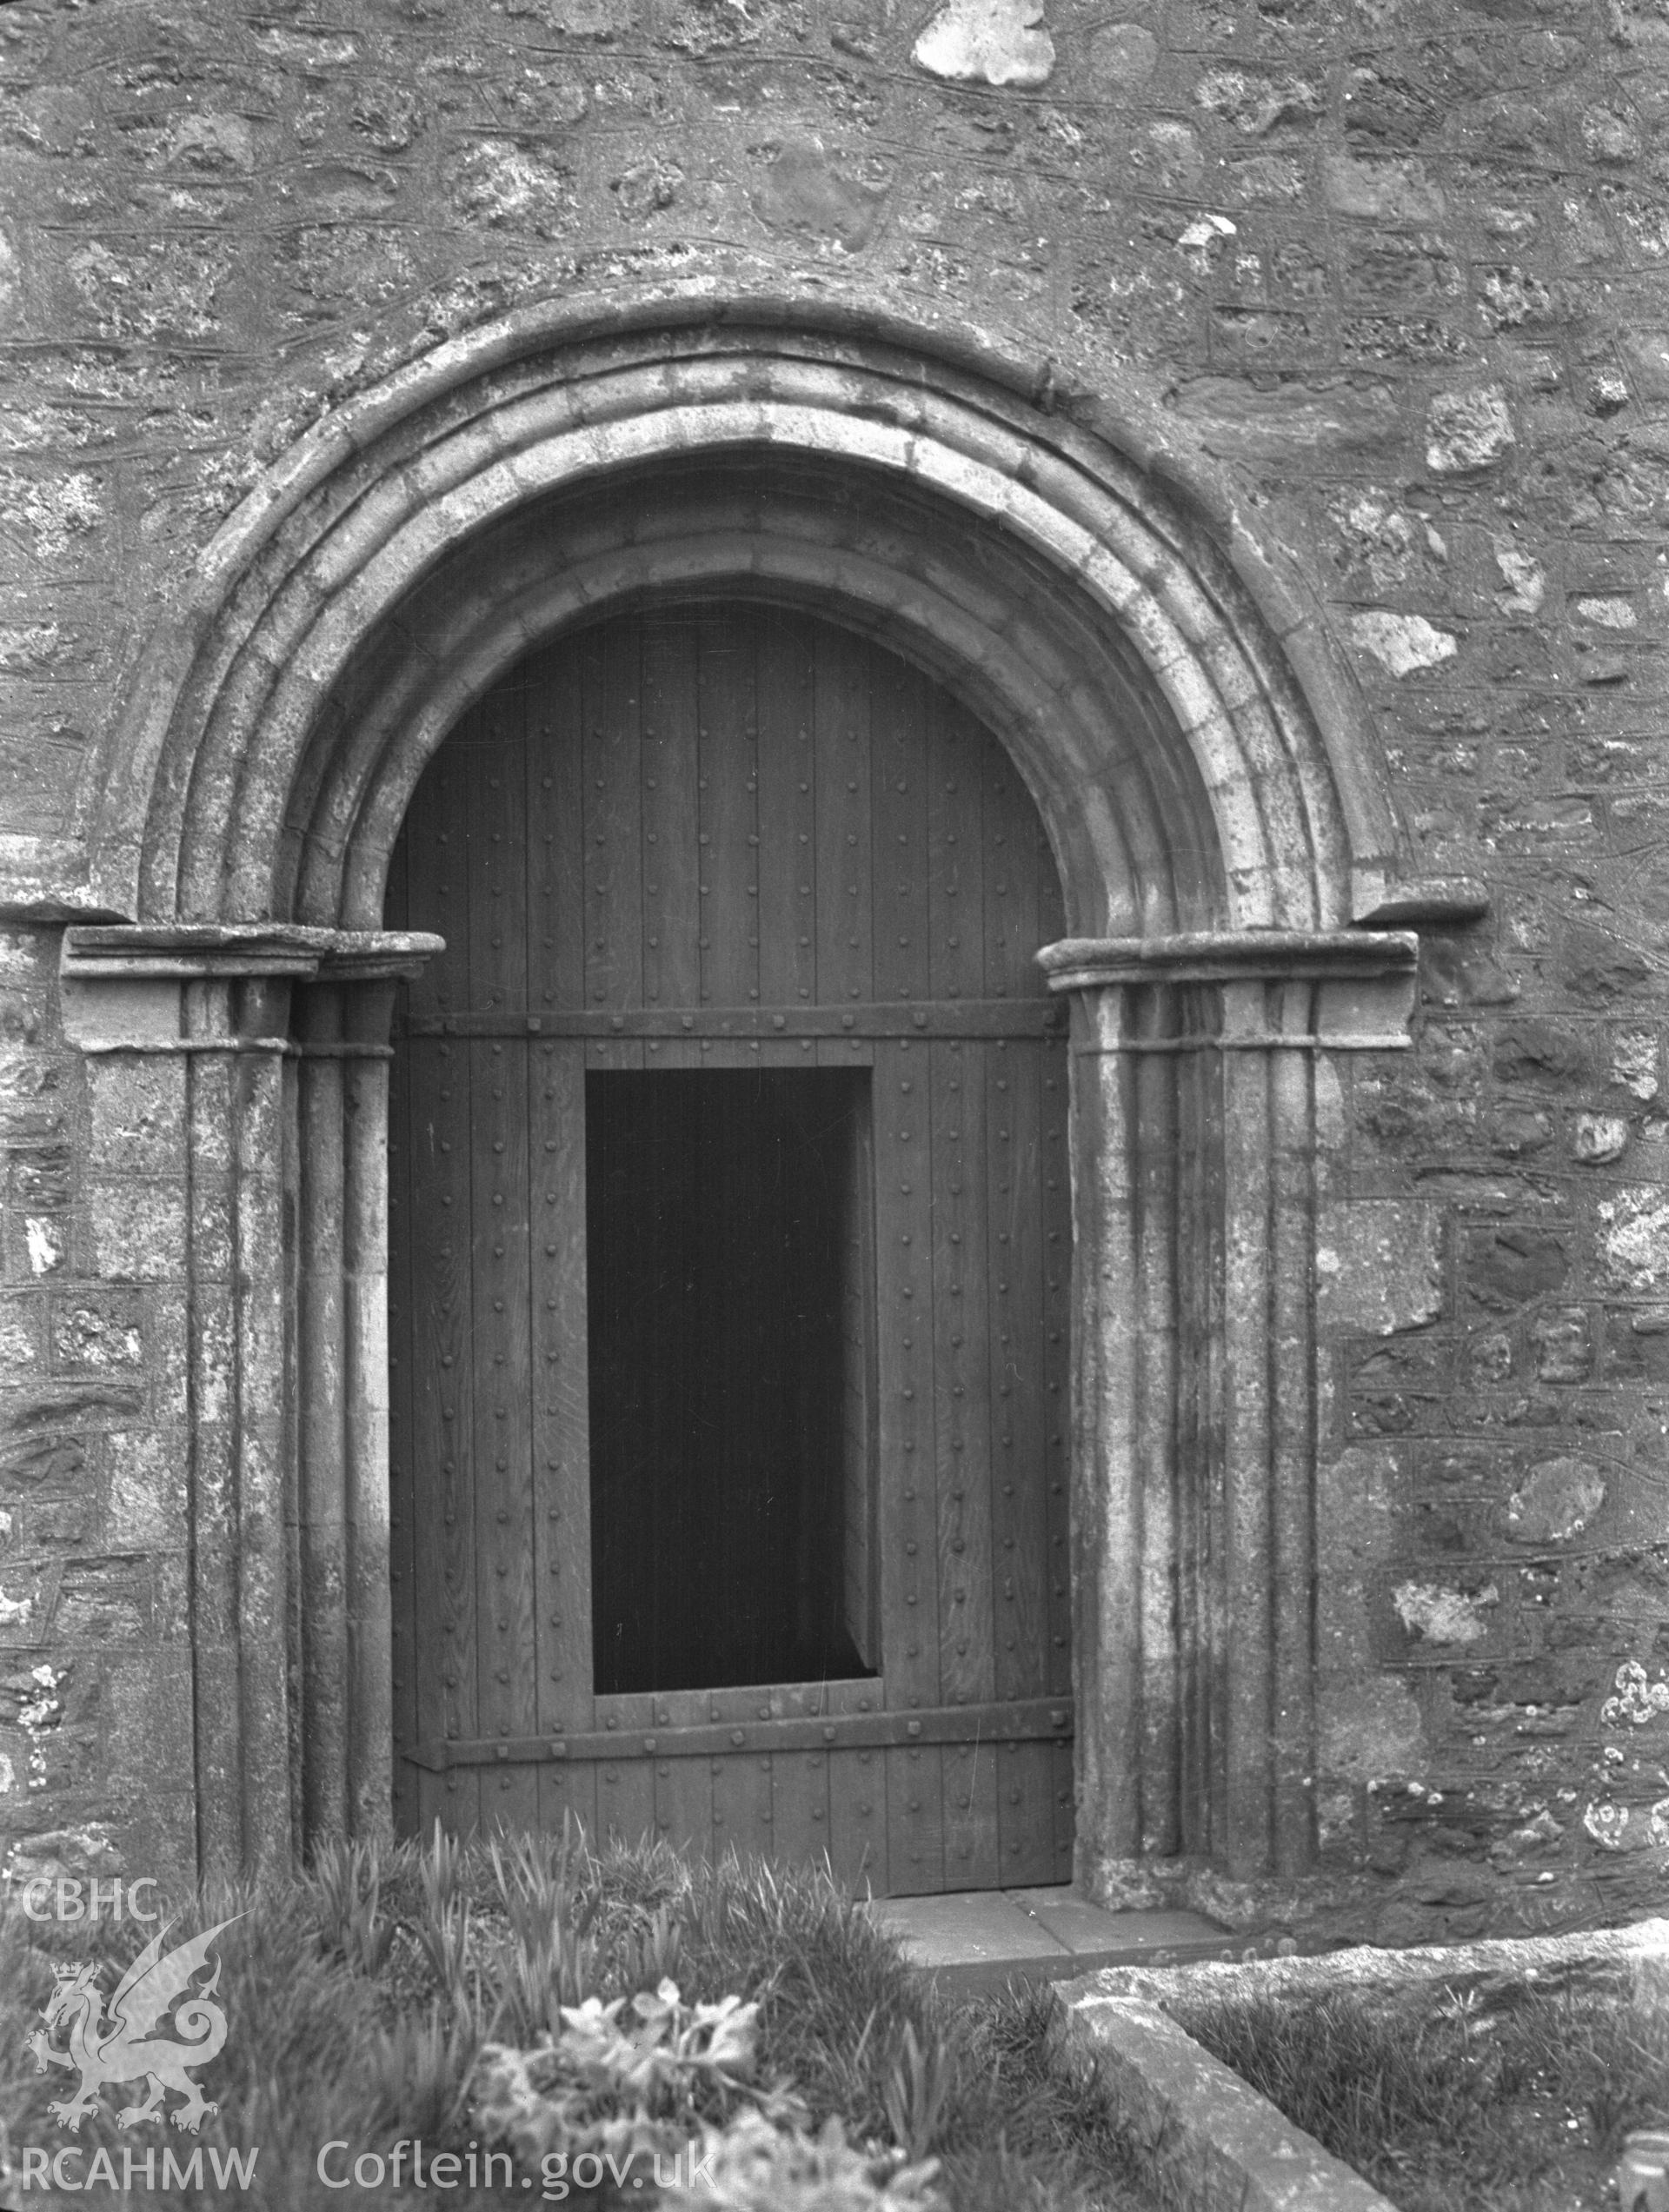 Digital copy of a nitrate negative showing exterior view of west doorway, St Augustine's Church, Rumney, taken circa 1936. From the National Building Record Postcard Collection.